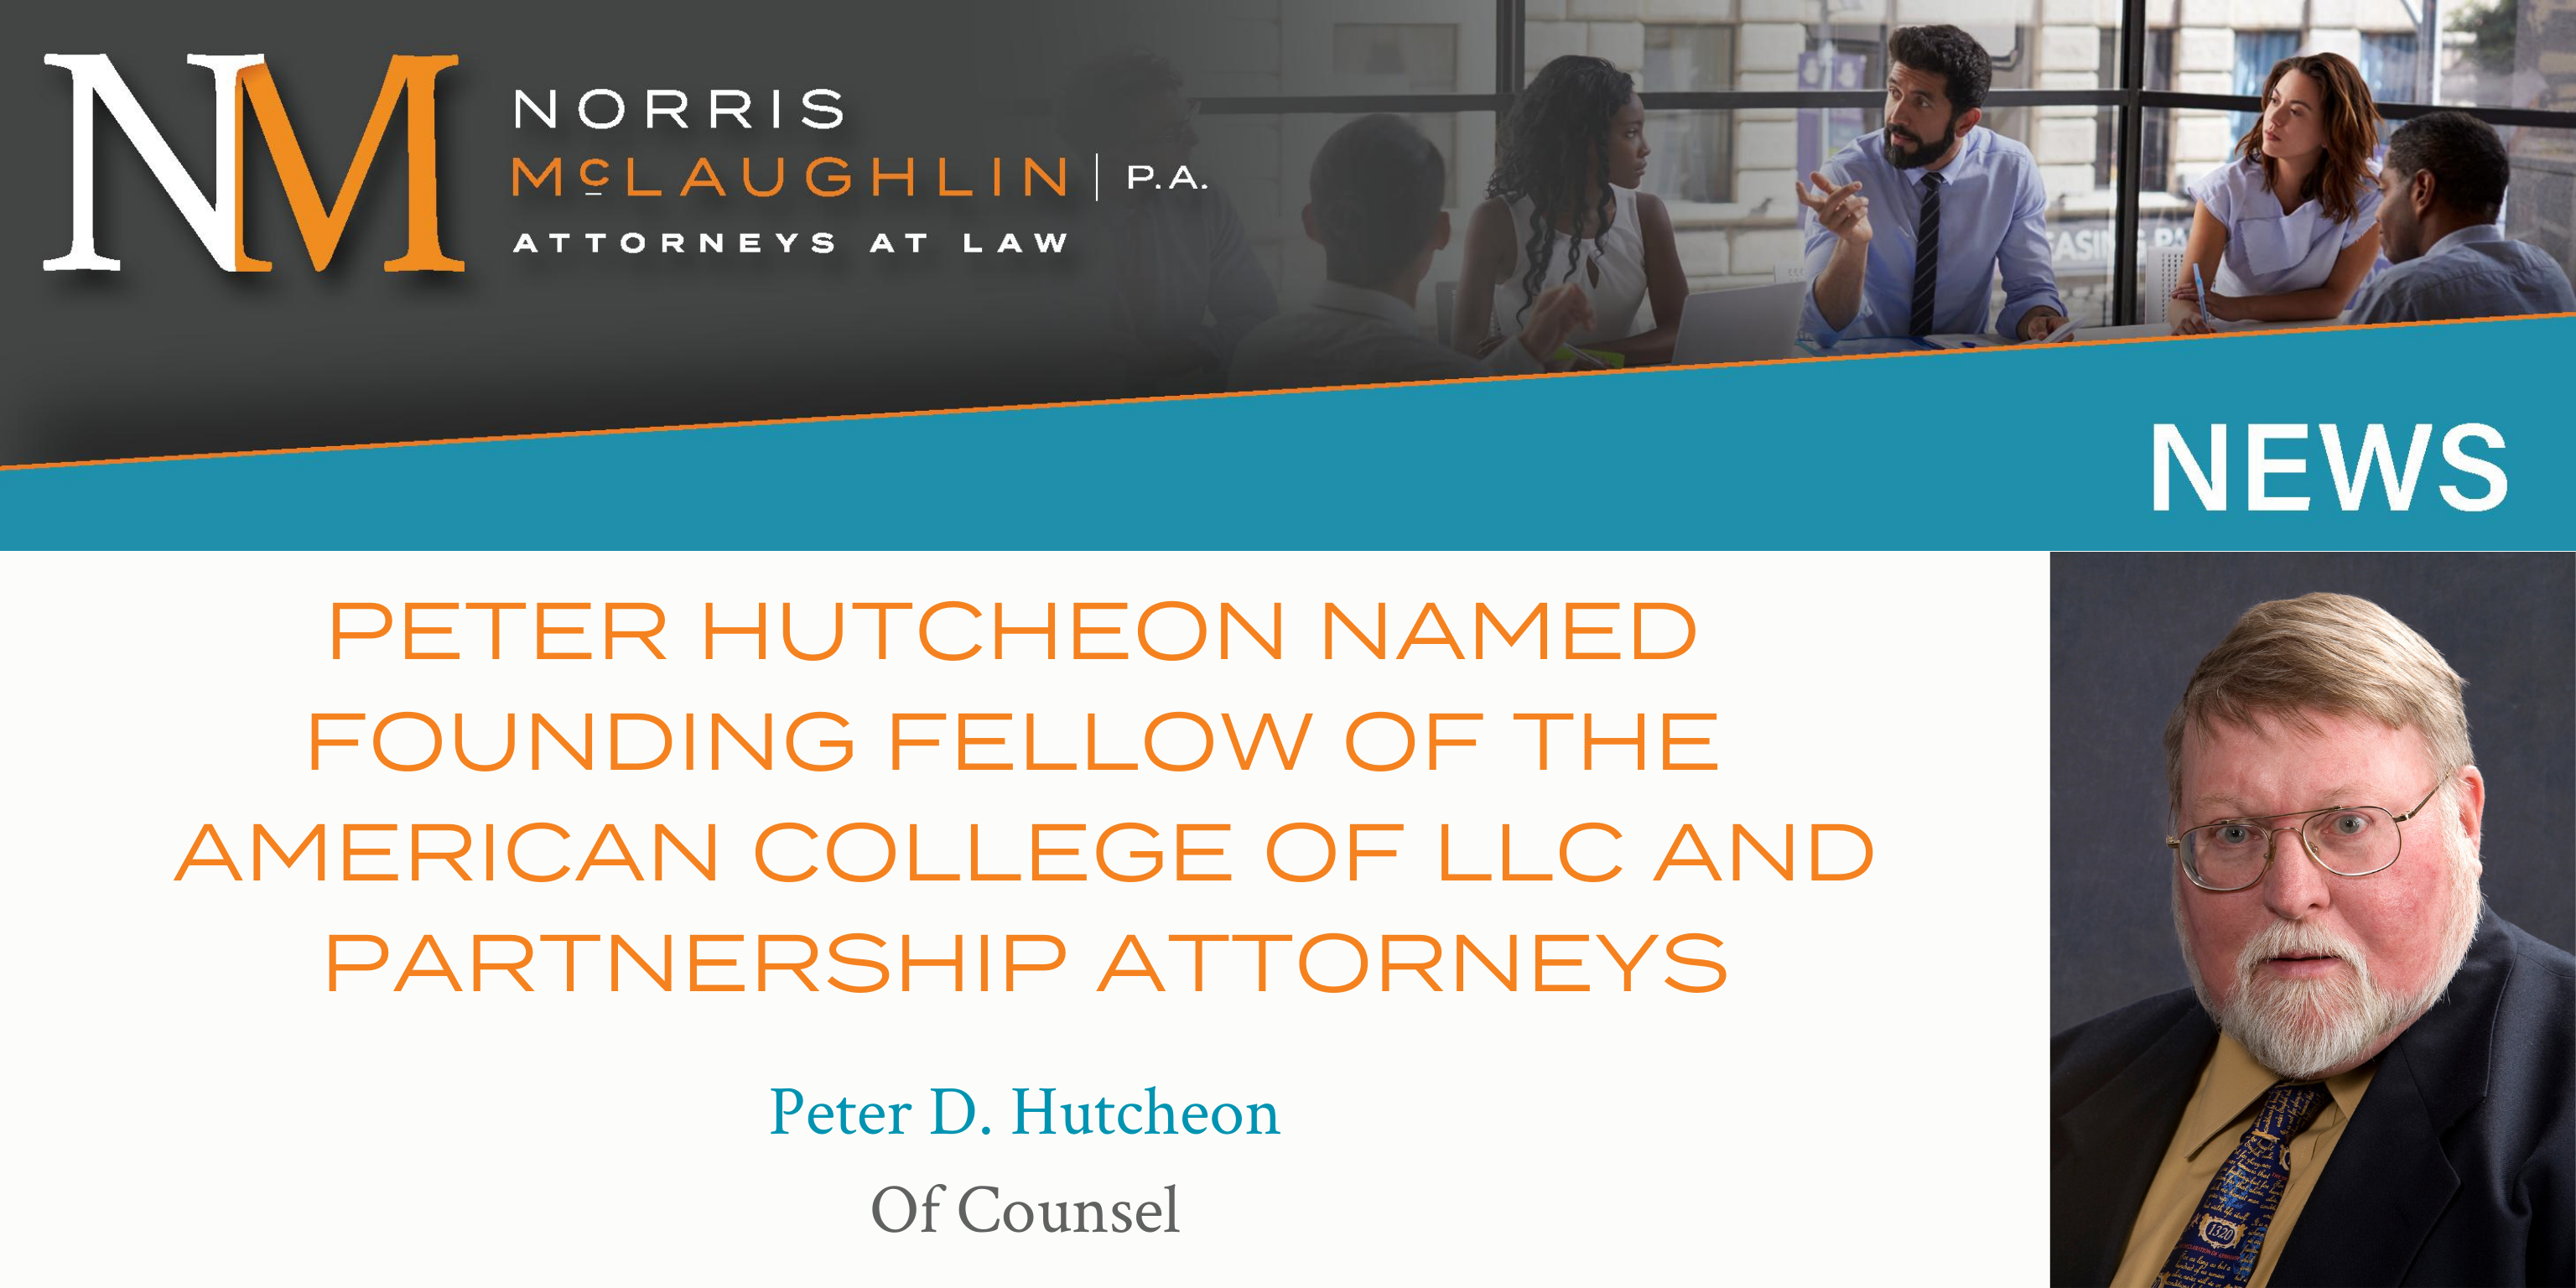 Peter Hutcheon Named Founding Fellow of the American College of LLC and Partnership Attorneys